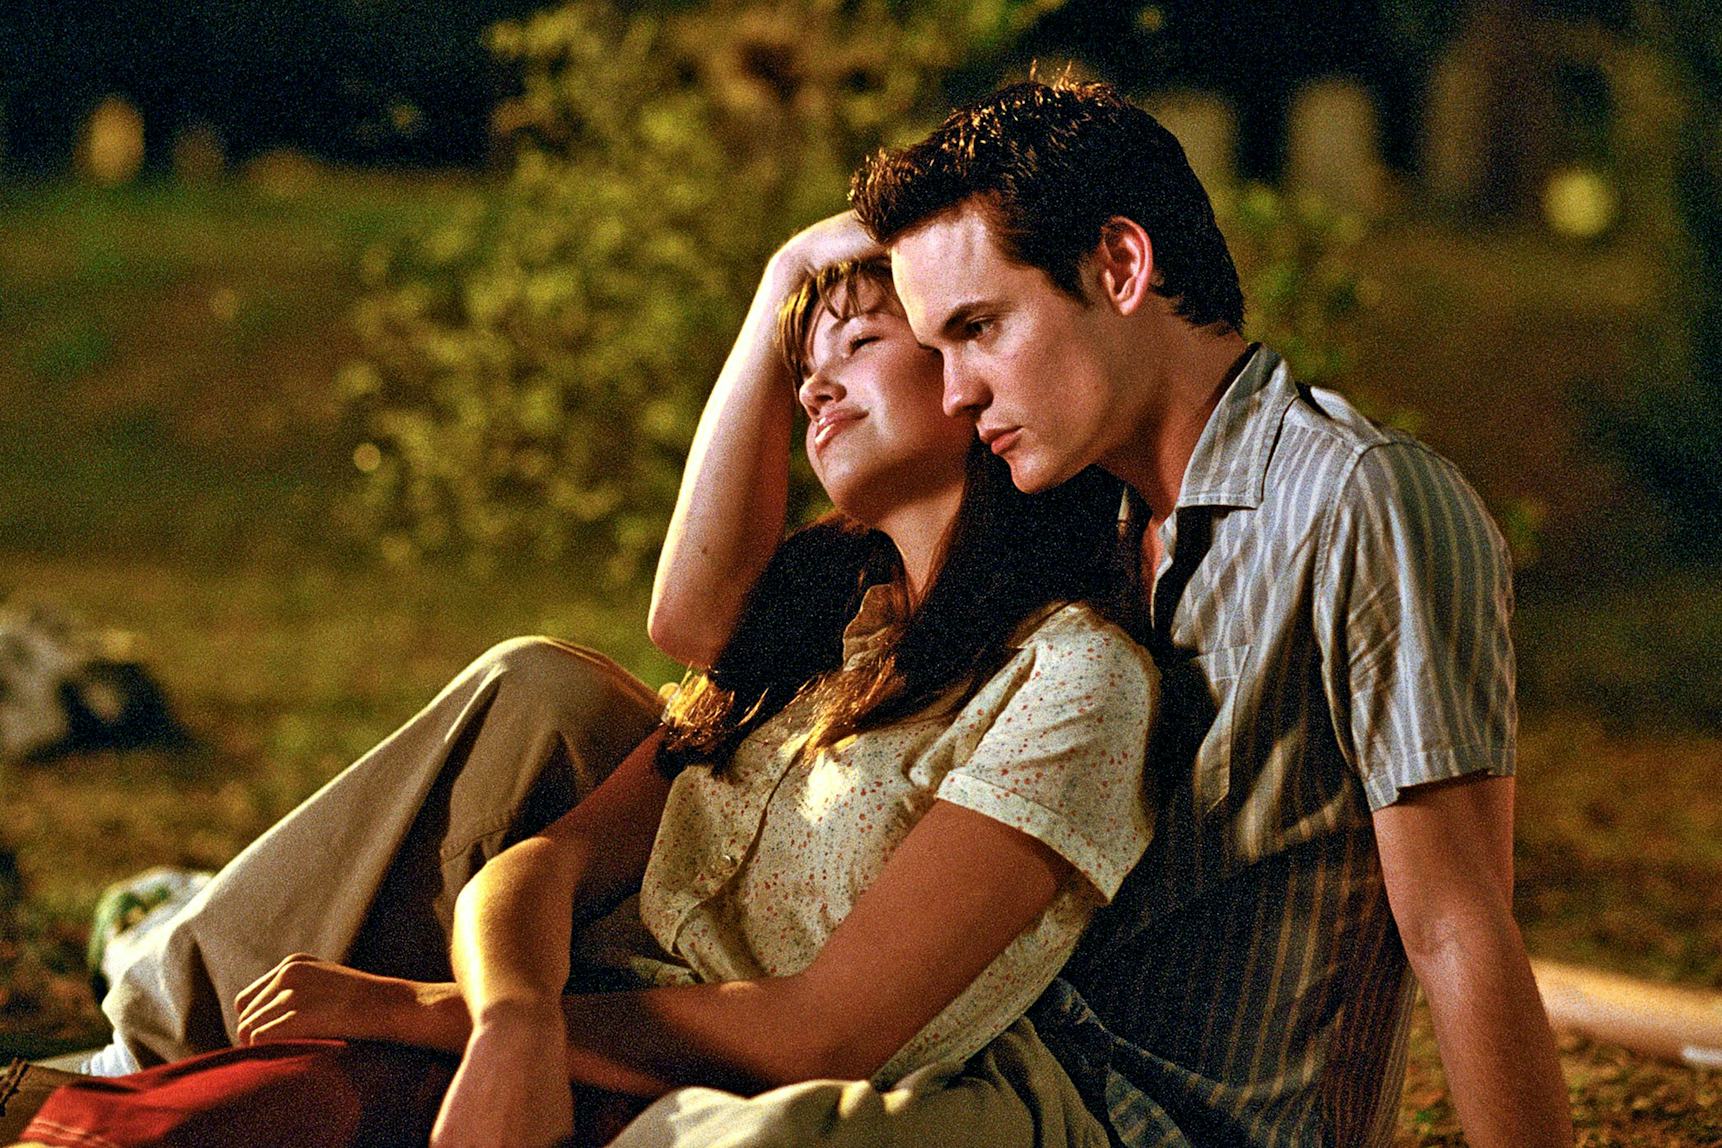 10 Sad Movies To Watch After A Breakup If You Feel Like You Just Need